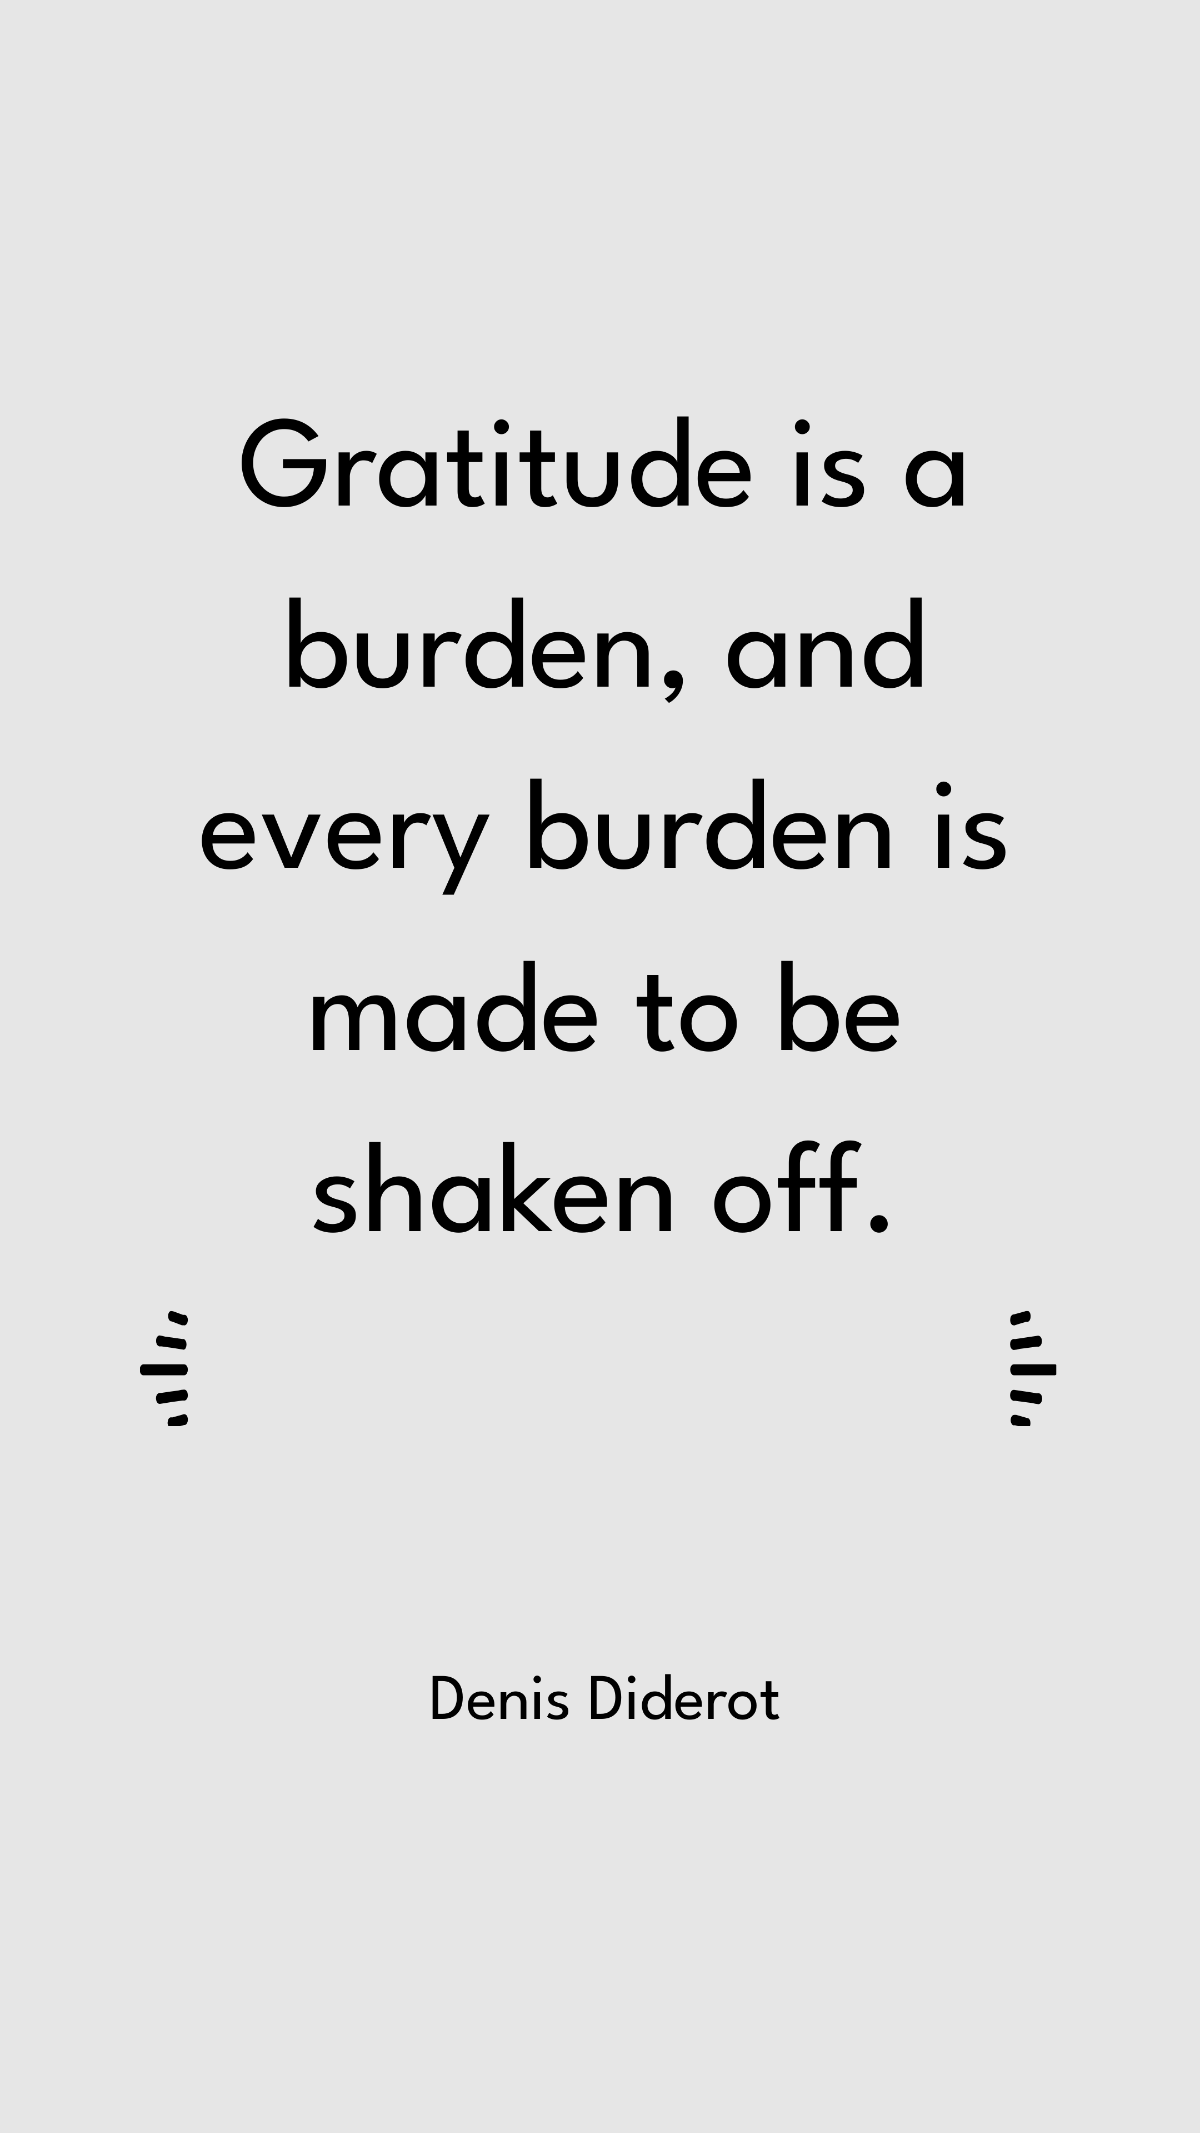 Free Denis Diderot - Gratitude is a burden, and every burden is made to be shaken off. Template